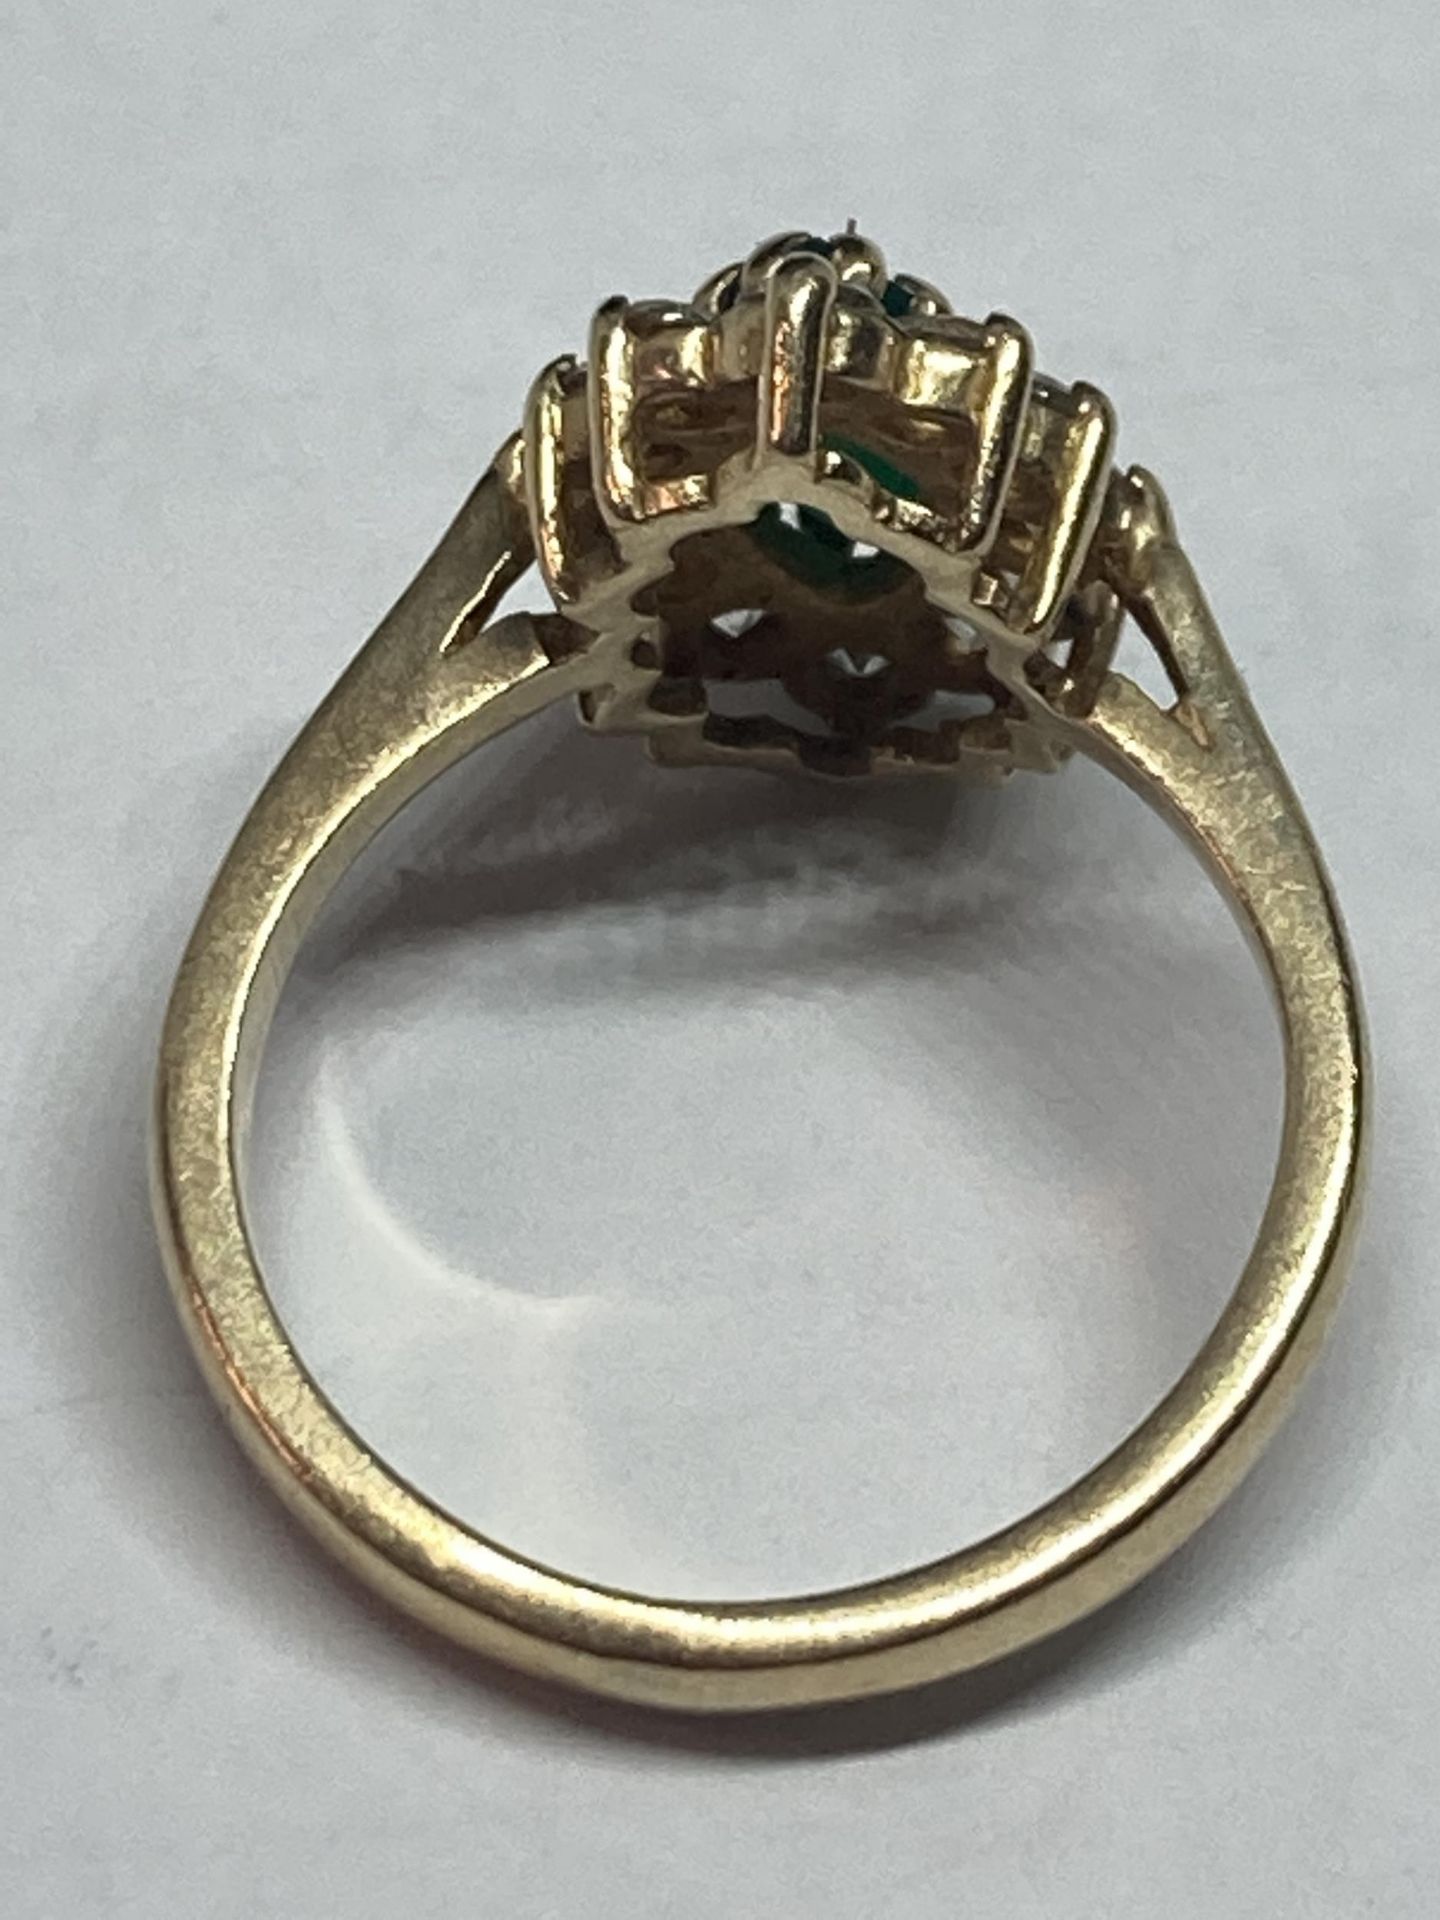 A 9 CARAT GOLD RING WITH A CENTRE EMERALD SURROUNDED BY CUBIC ZIRCONIAS SIZE L - Image 3 of 4